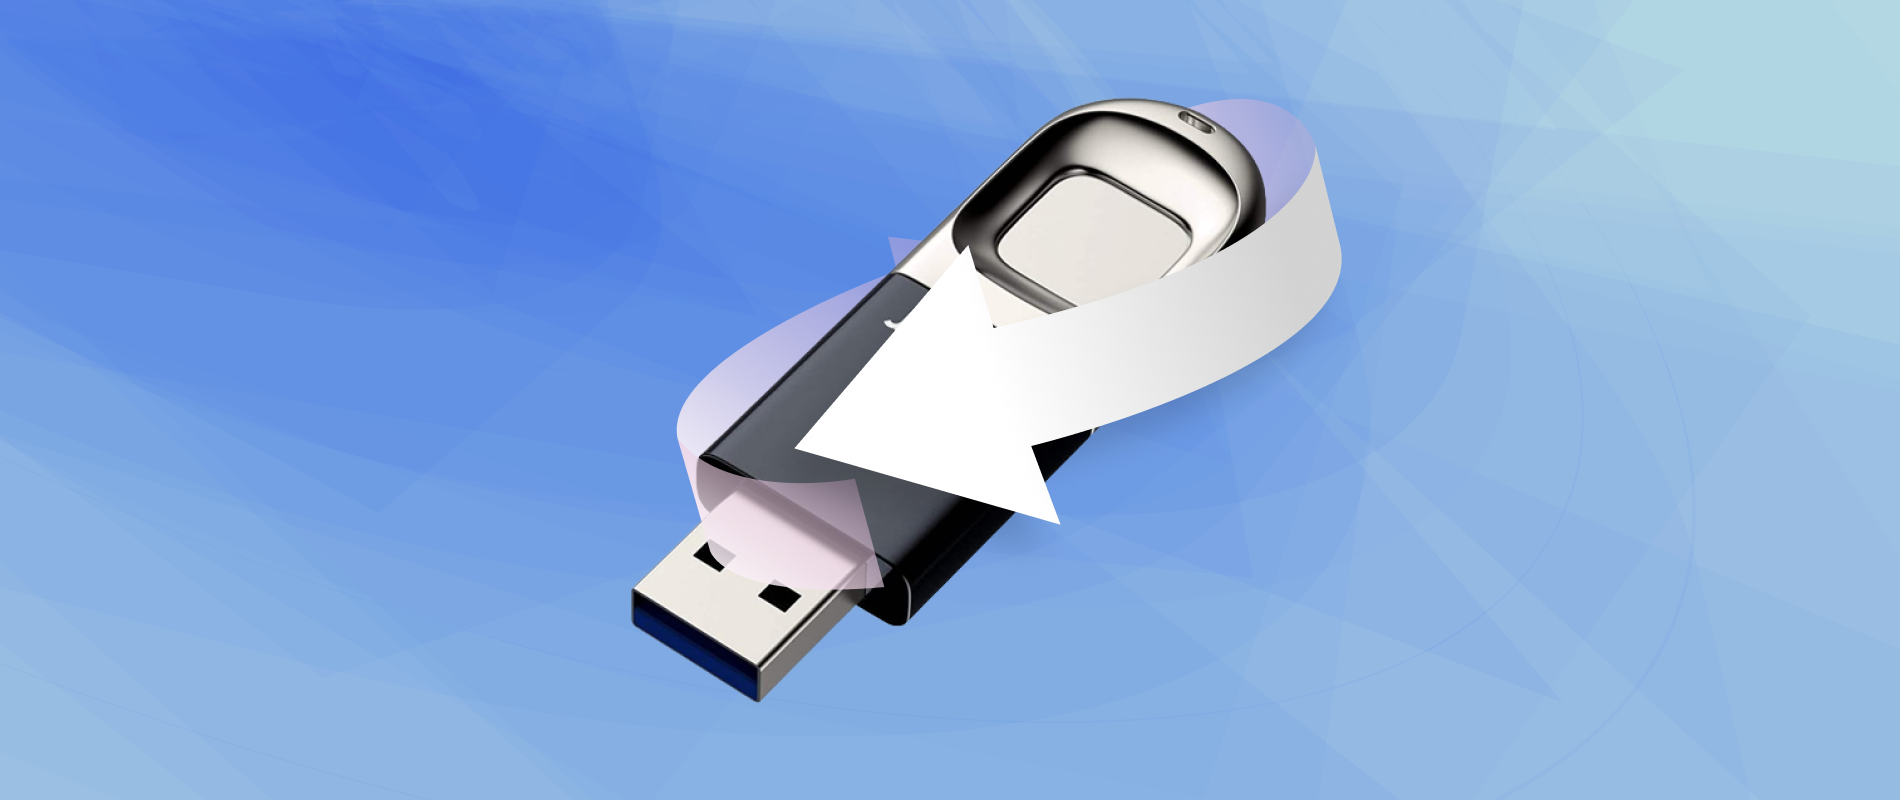 Recover Deleted Files From USB Flash Drive